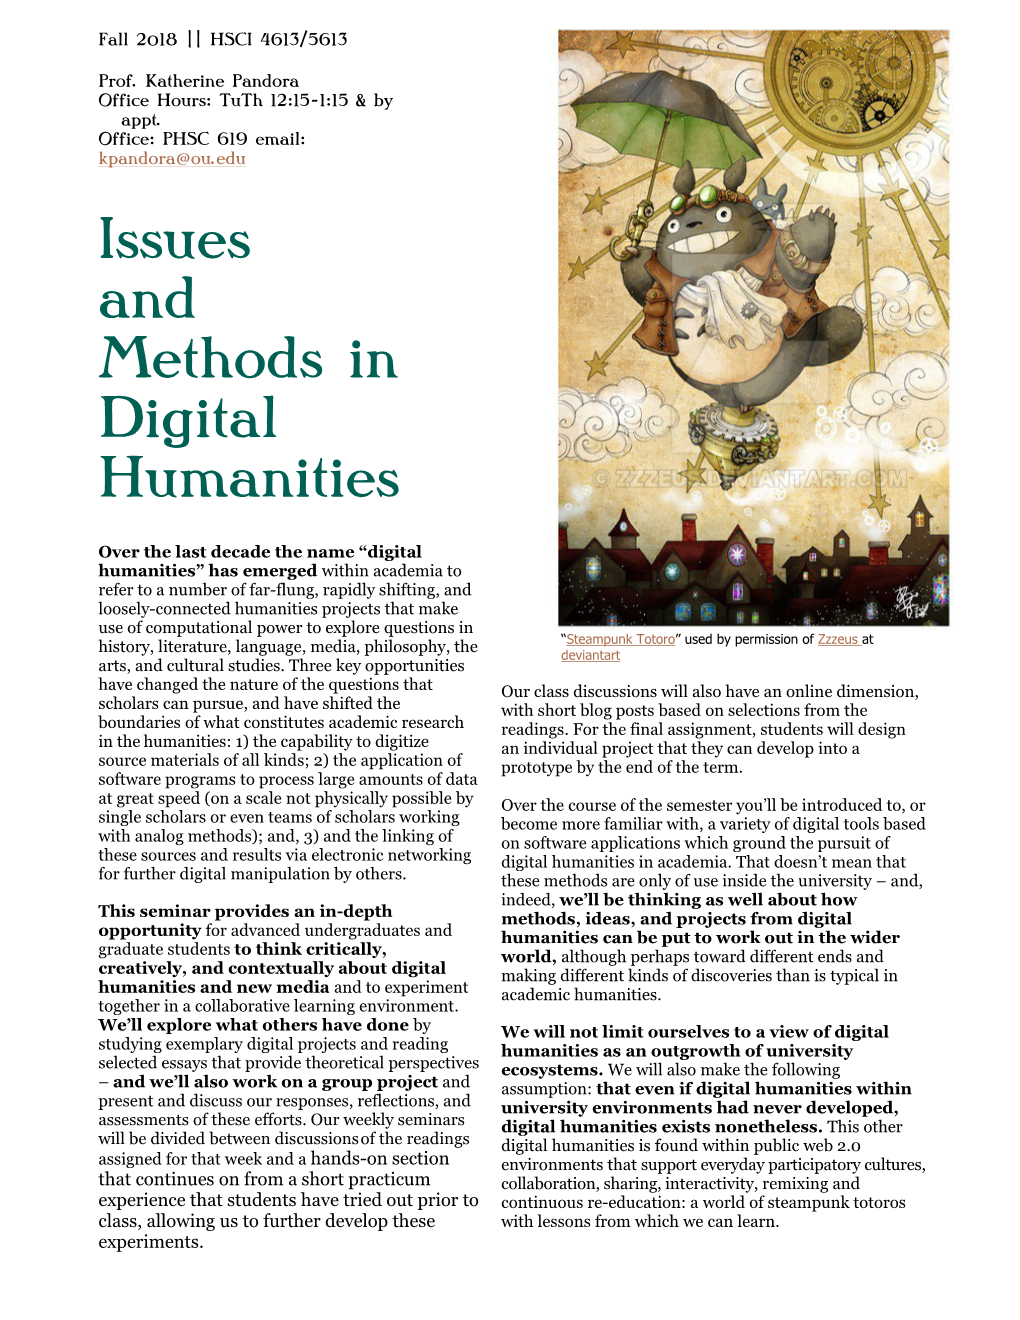 Issues and Methods in Digital Humanities